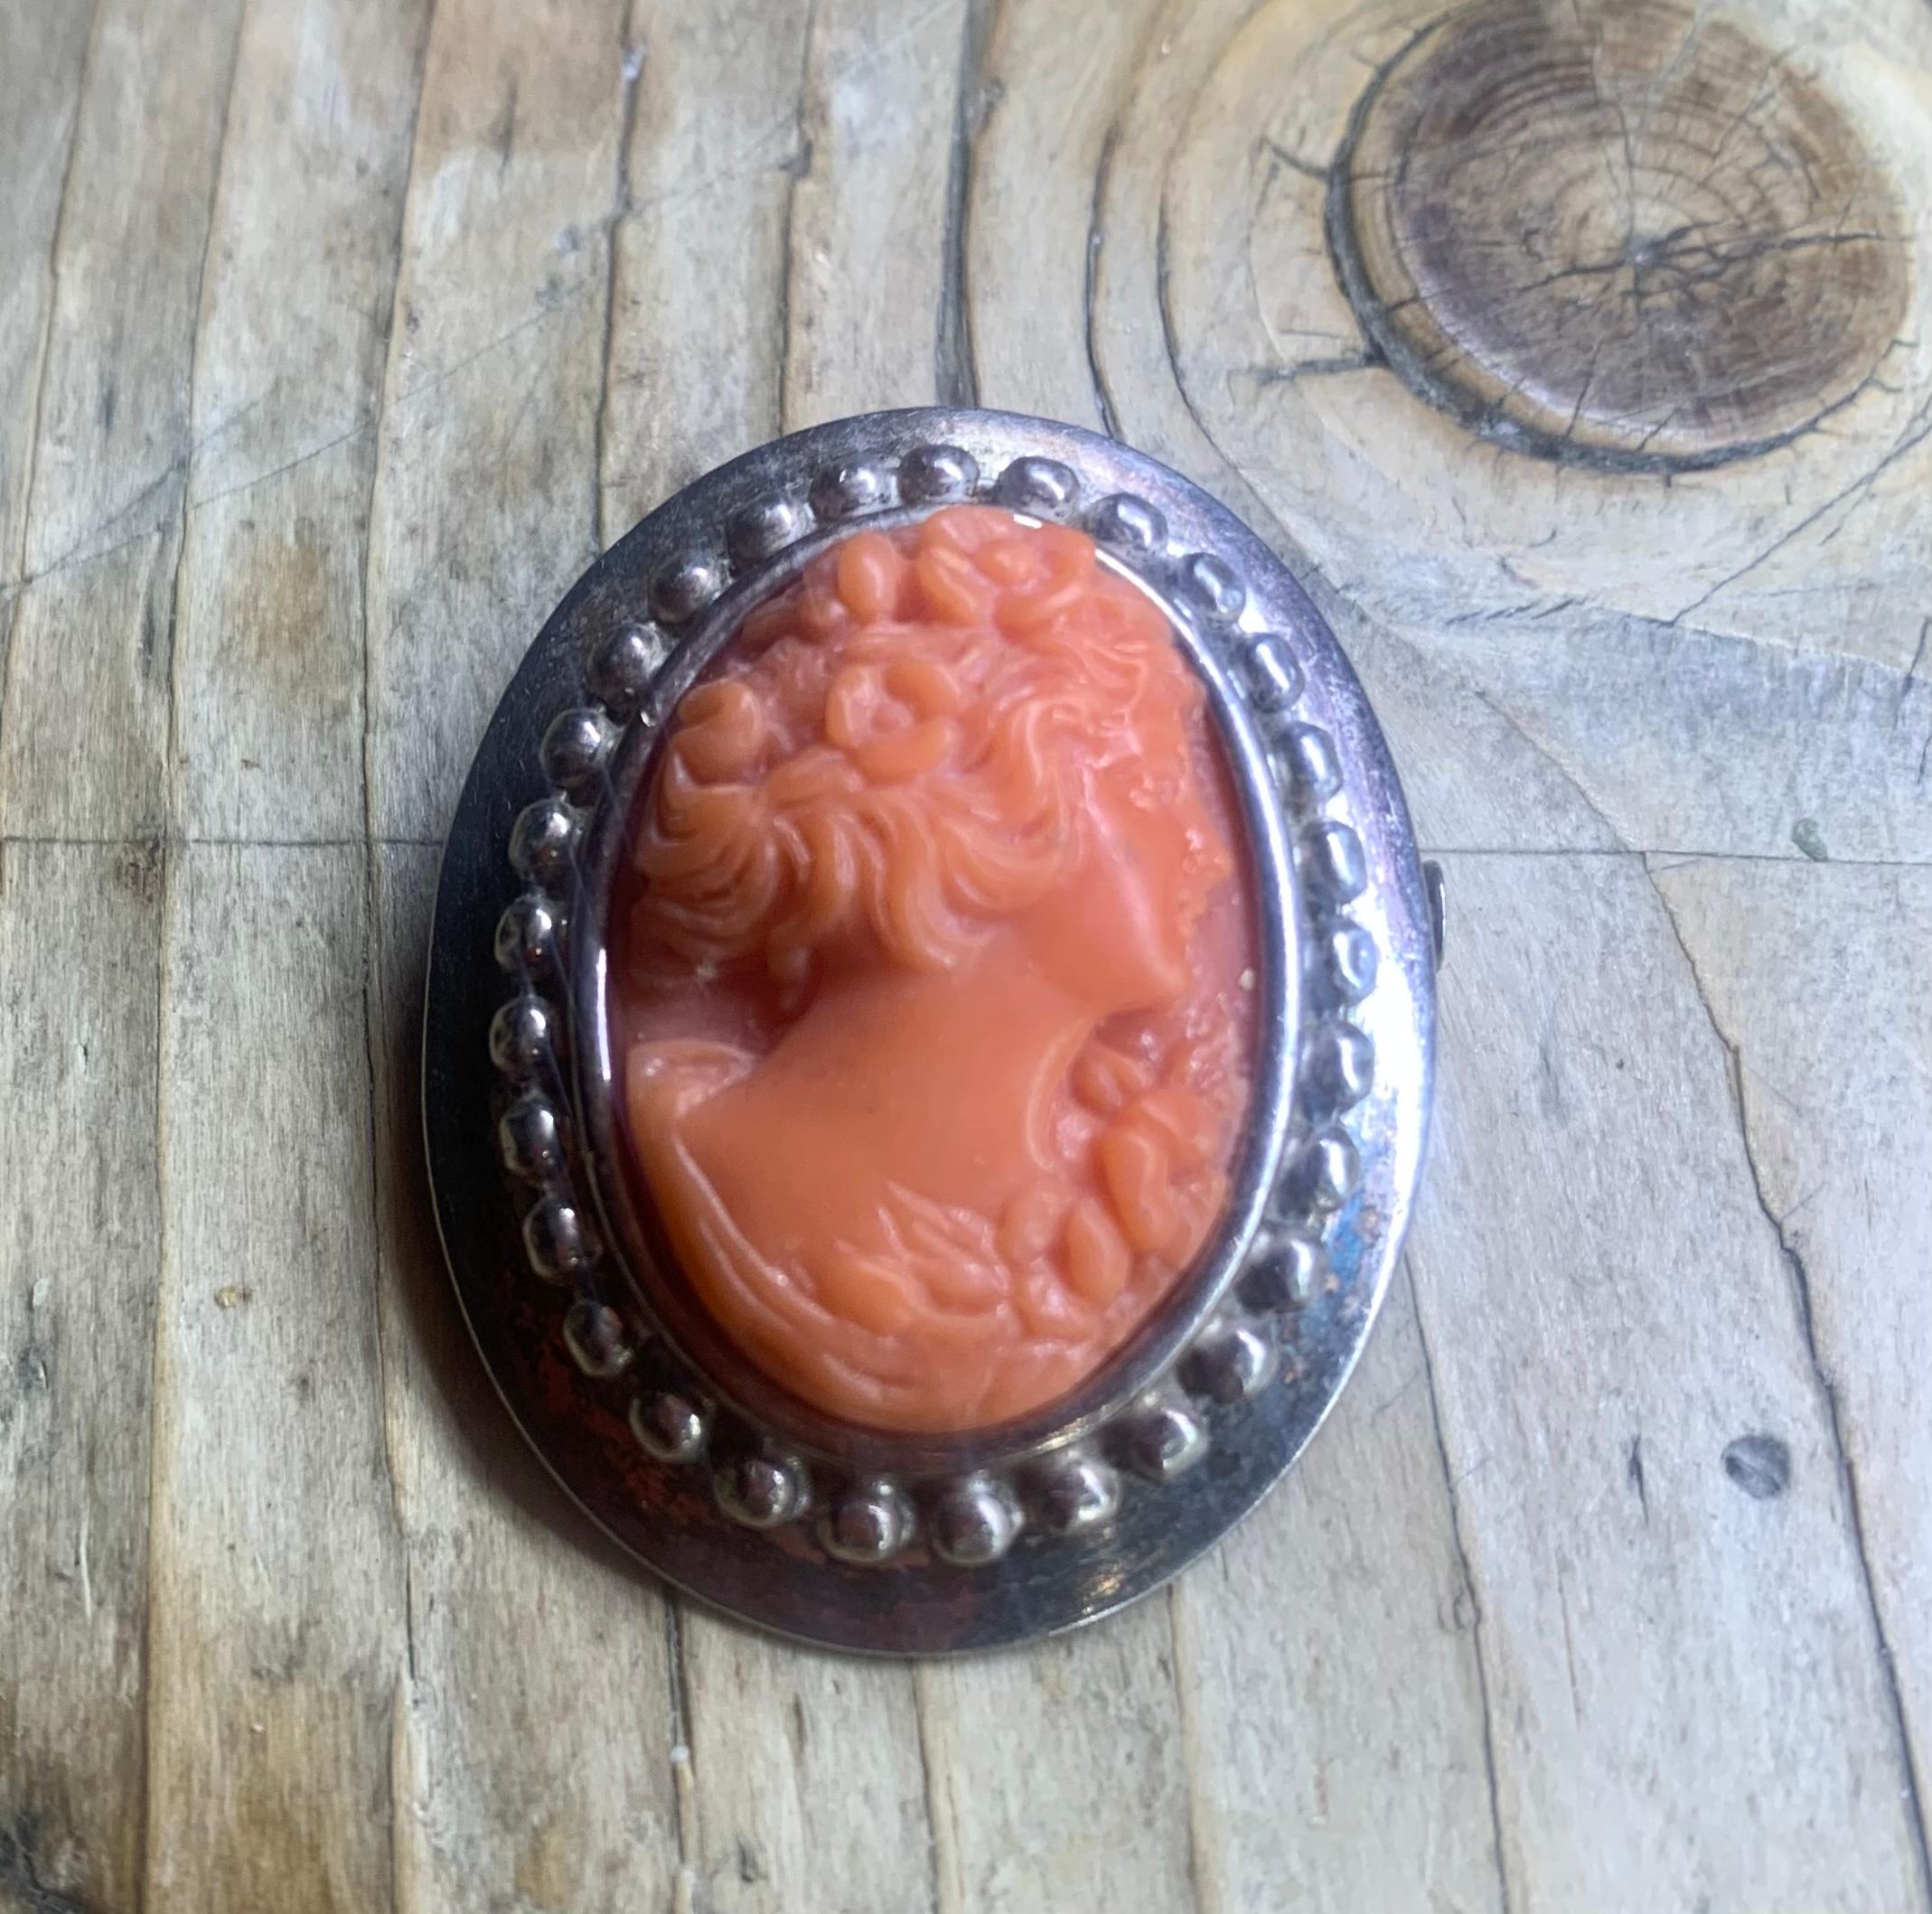 FREE SHIPPING WORLDWIDE

Early 20th century Italian cameo with woman profile. 

Hand carved cameo.

Dimensions: H 3.5cm x W 3cm 

Italian manufactory of early 20th century. Probably Torre del Greco, Neaples area.

Silver mounting with perfectly